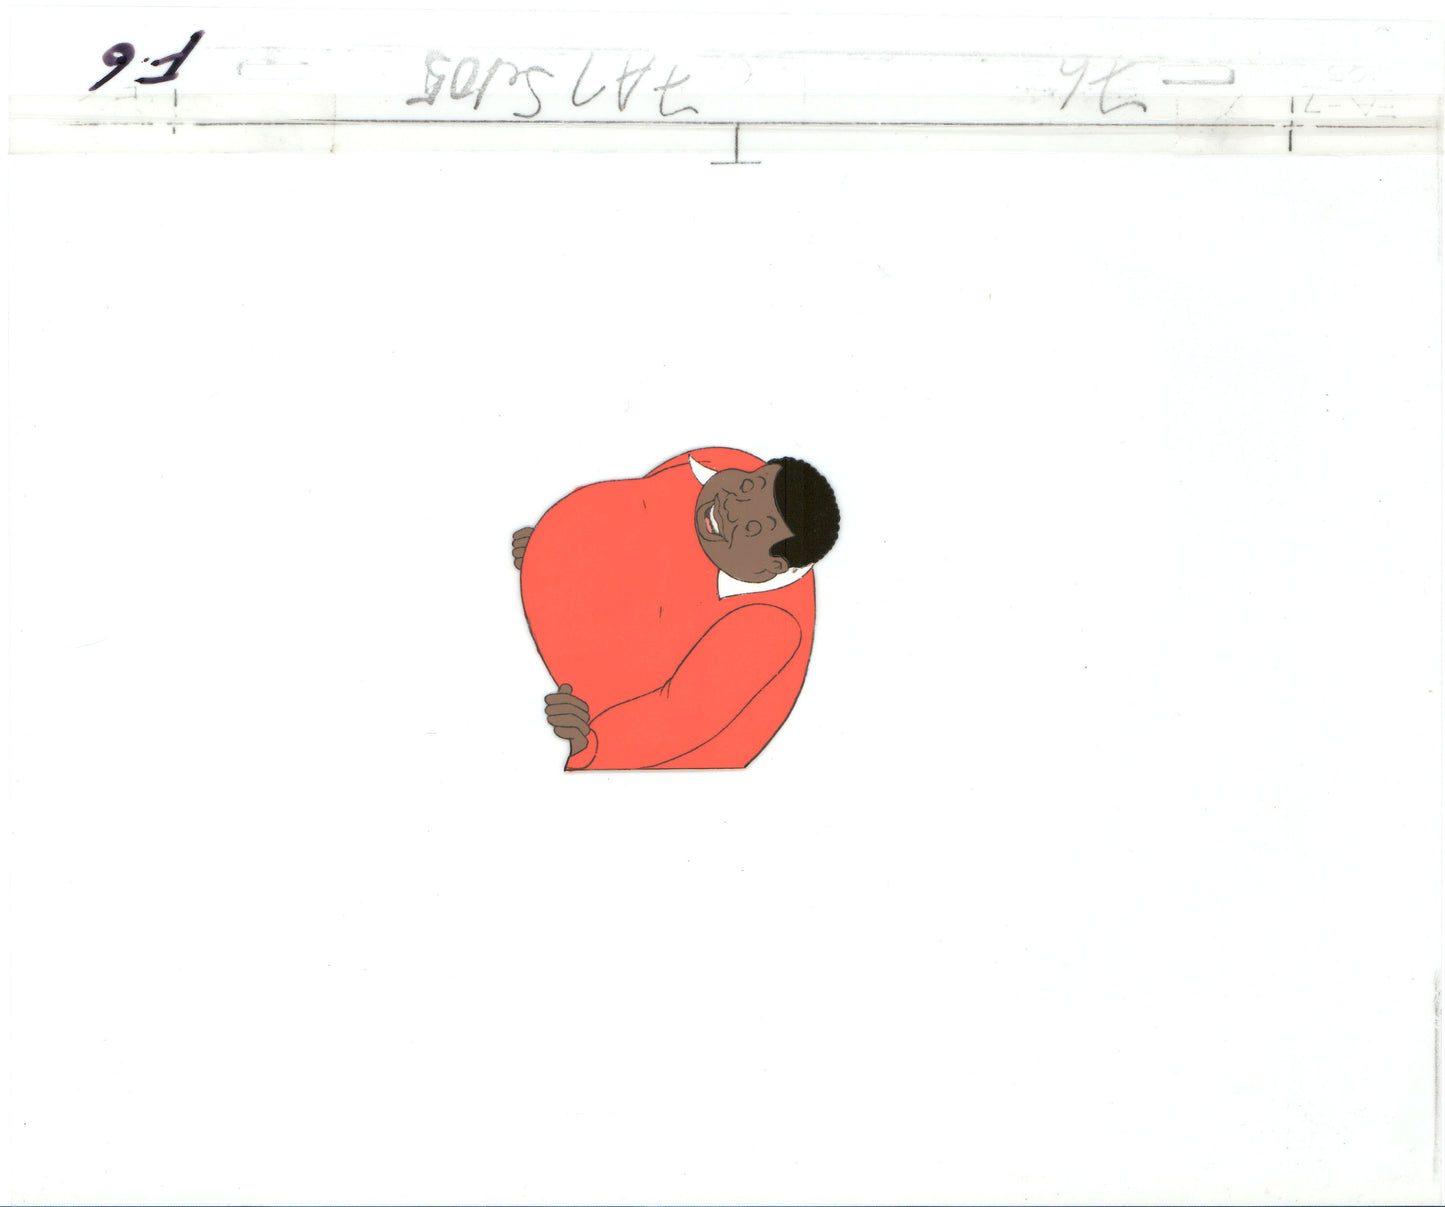 Fat Albert & the Gang Production Animation Cel Used to Make the Filmation Cartoon 1972-75 b2048